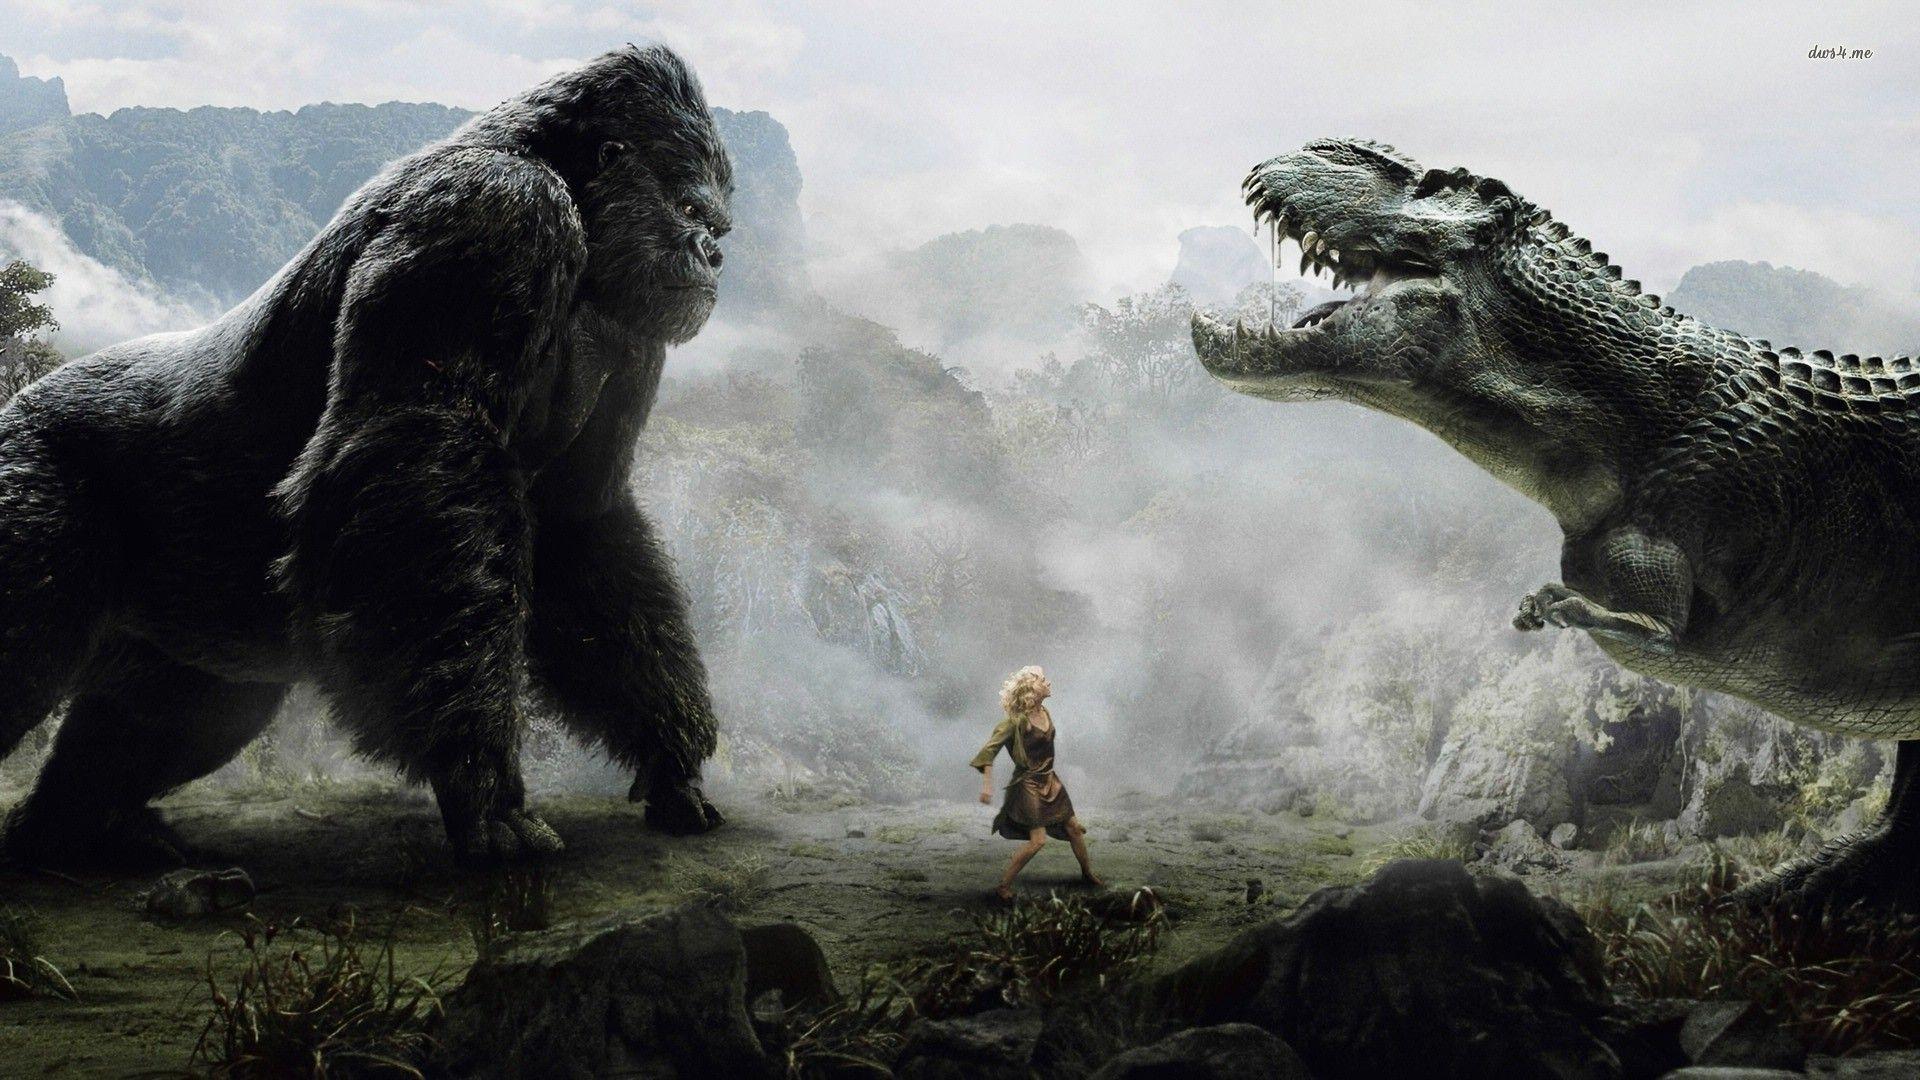 The Big Monsters Brawl ‘Godzilla vs. Kong’ and The Audience Actually Wins